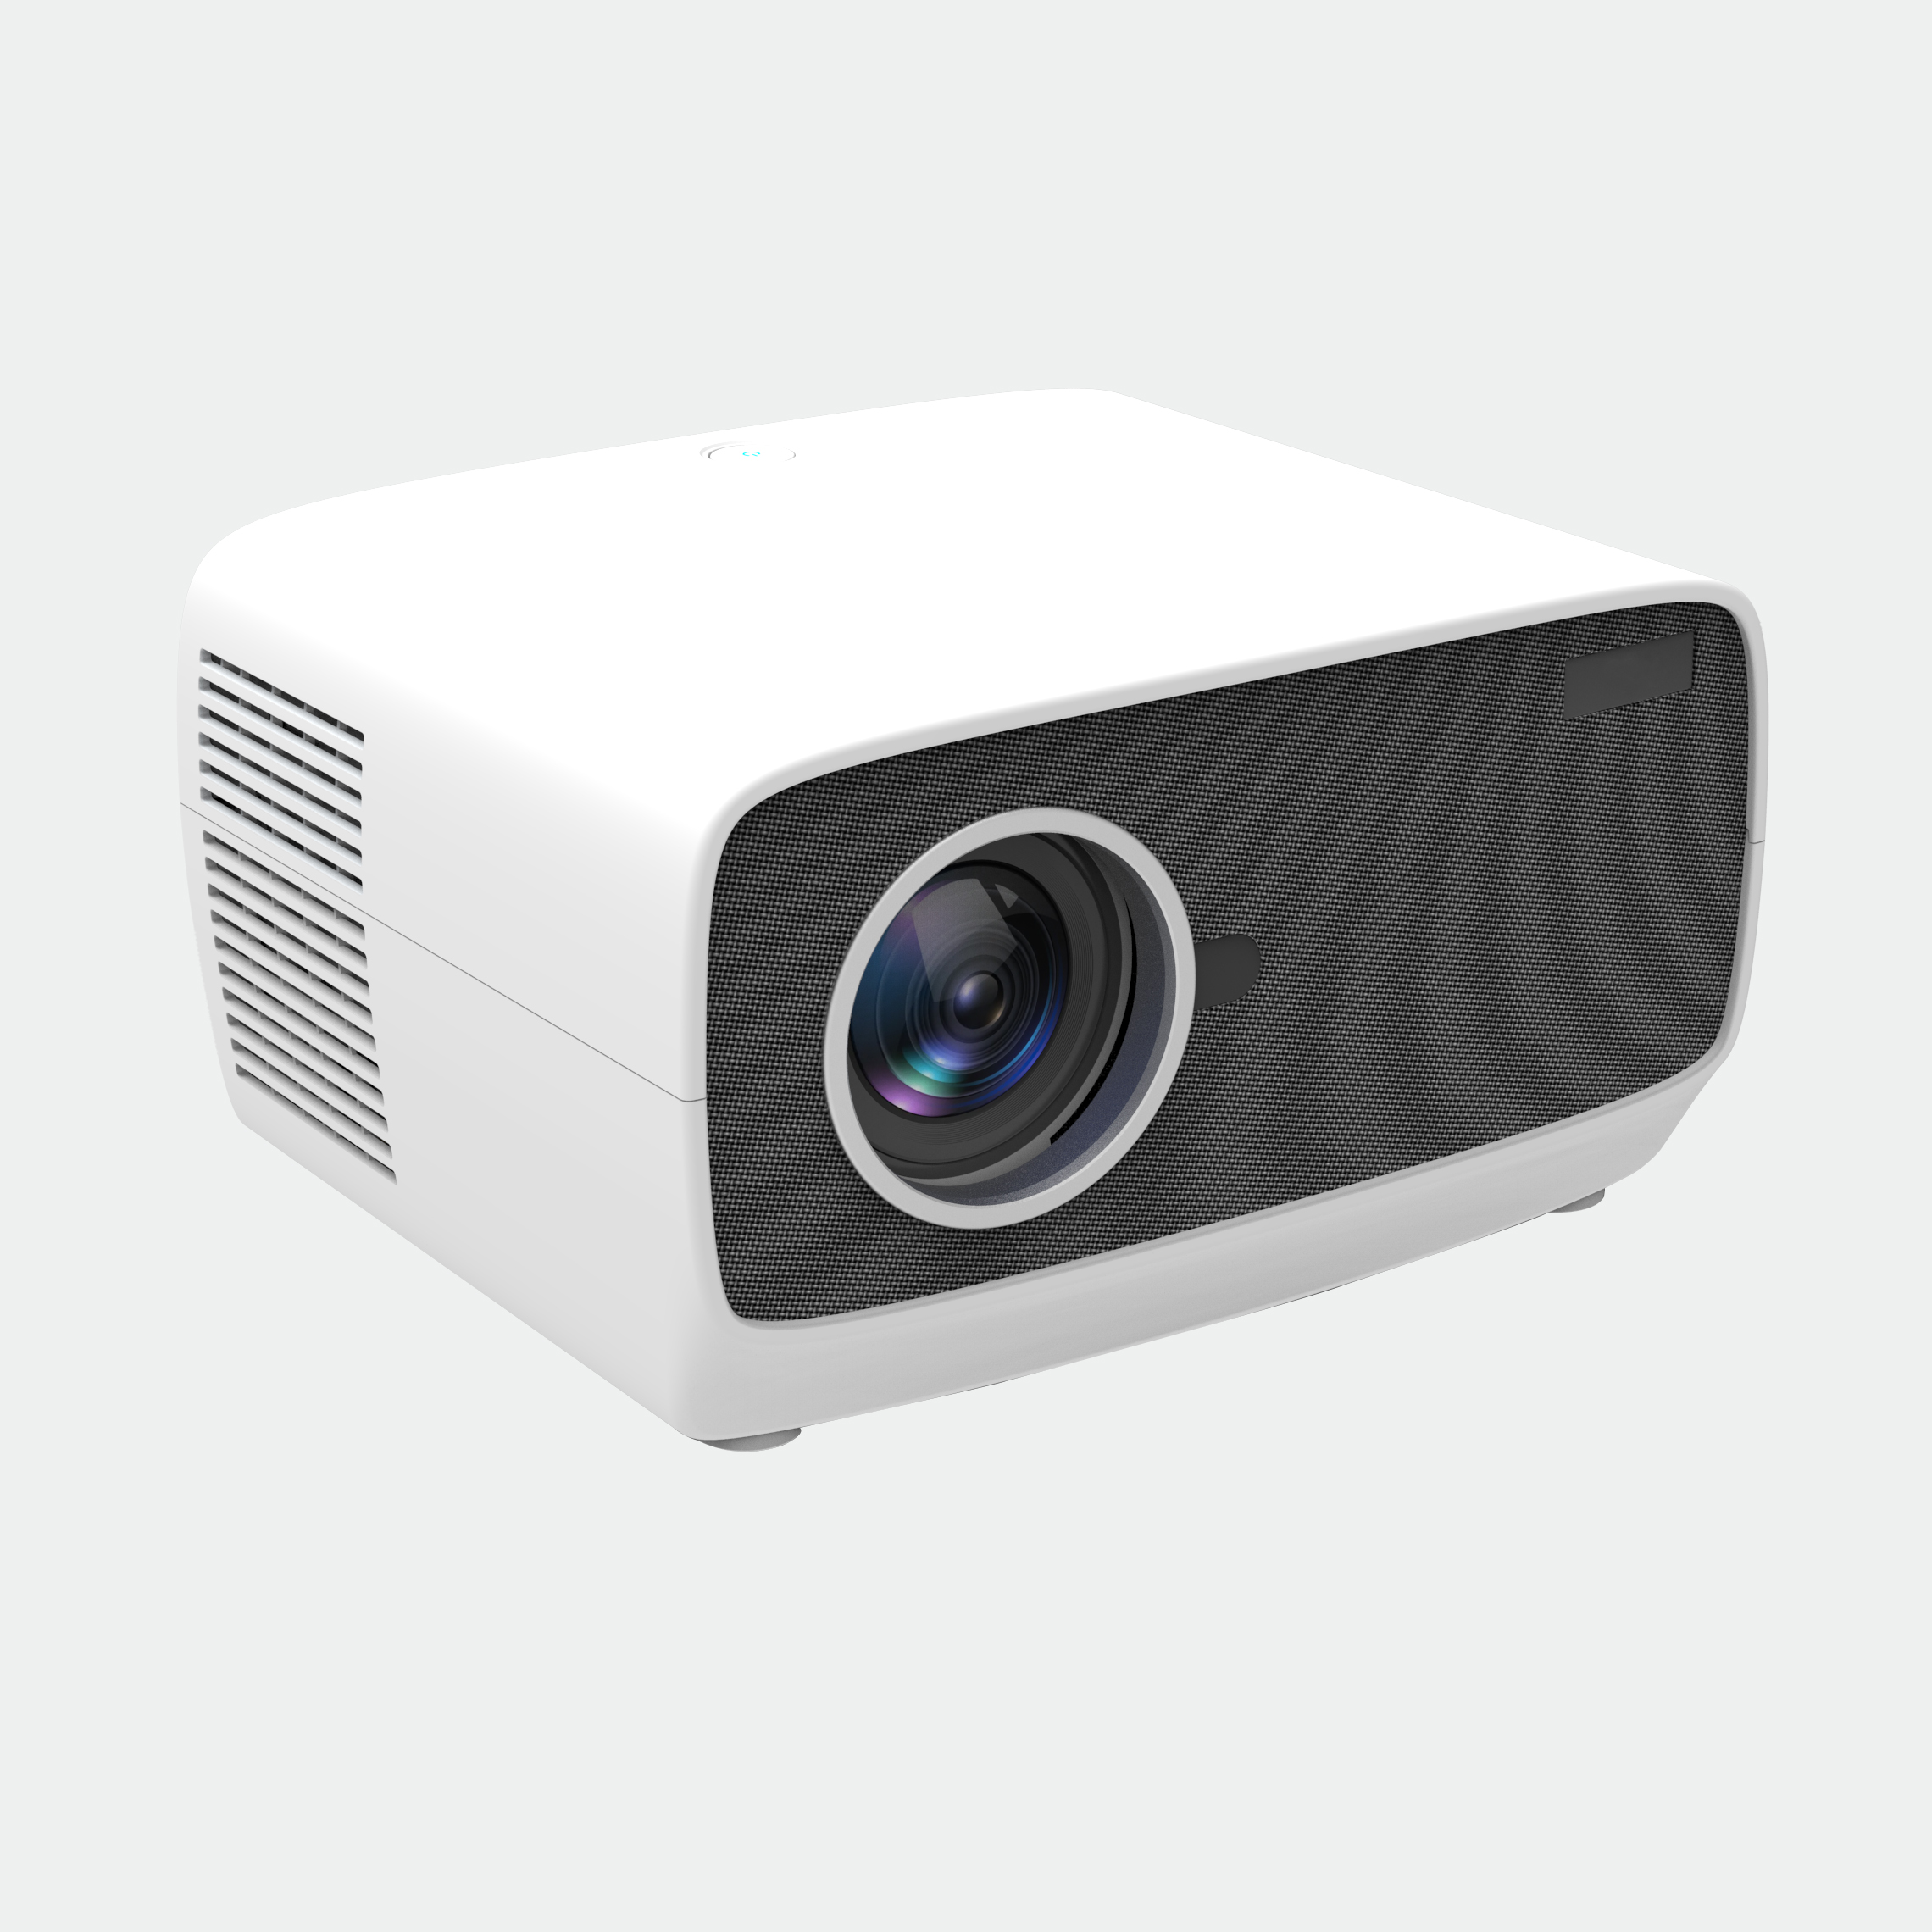 Portable Video Projector 1080p 850 Lumens LCD Projector for Home Theater with Wifi